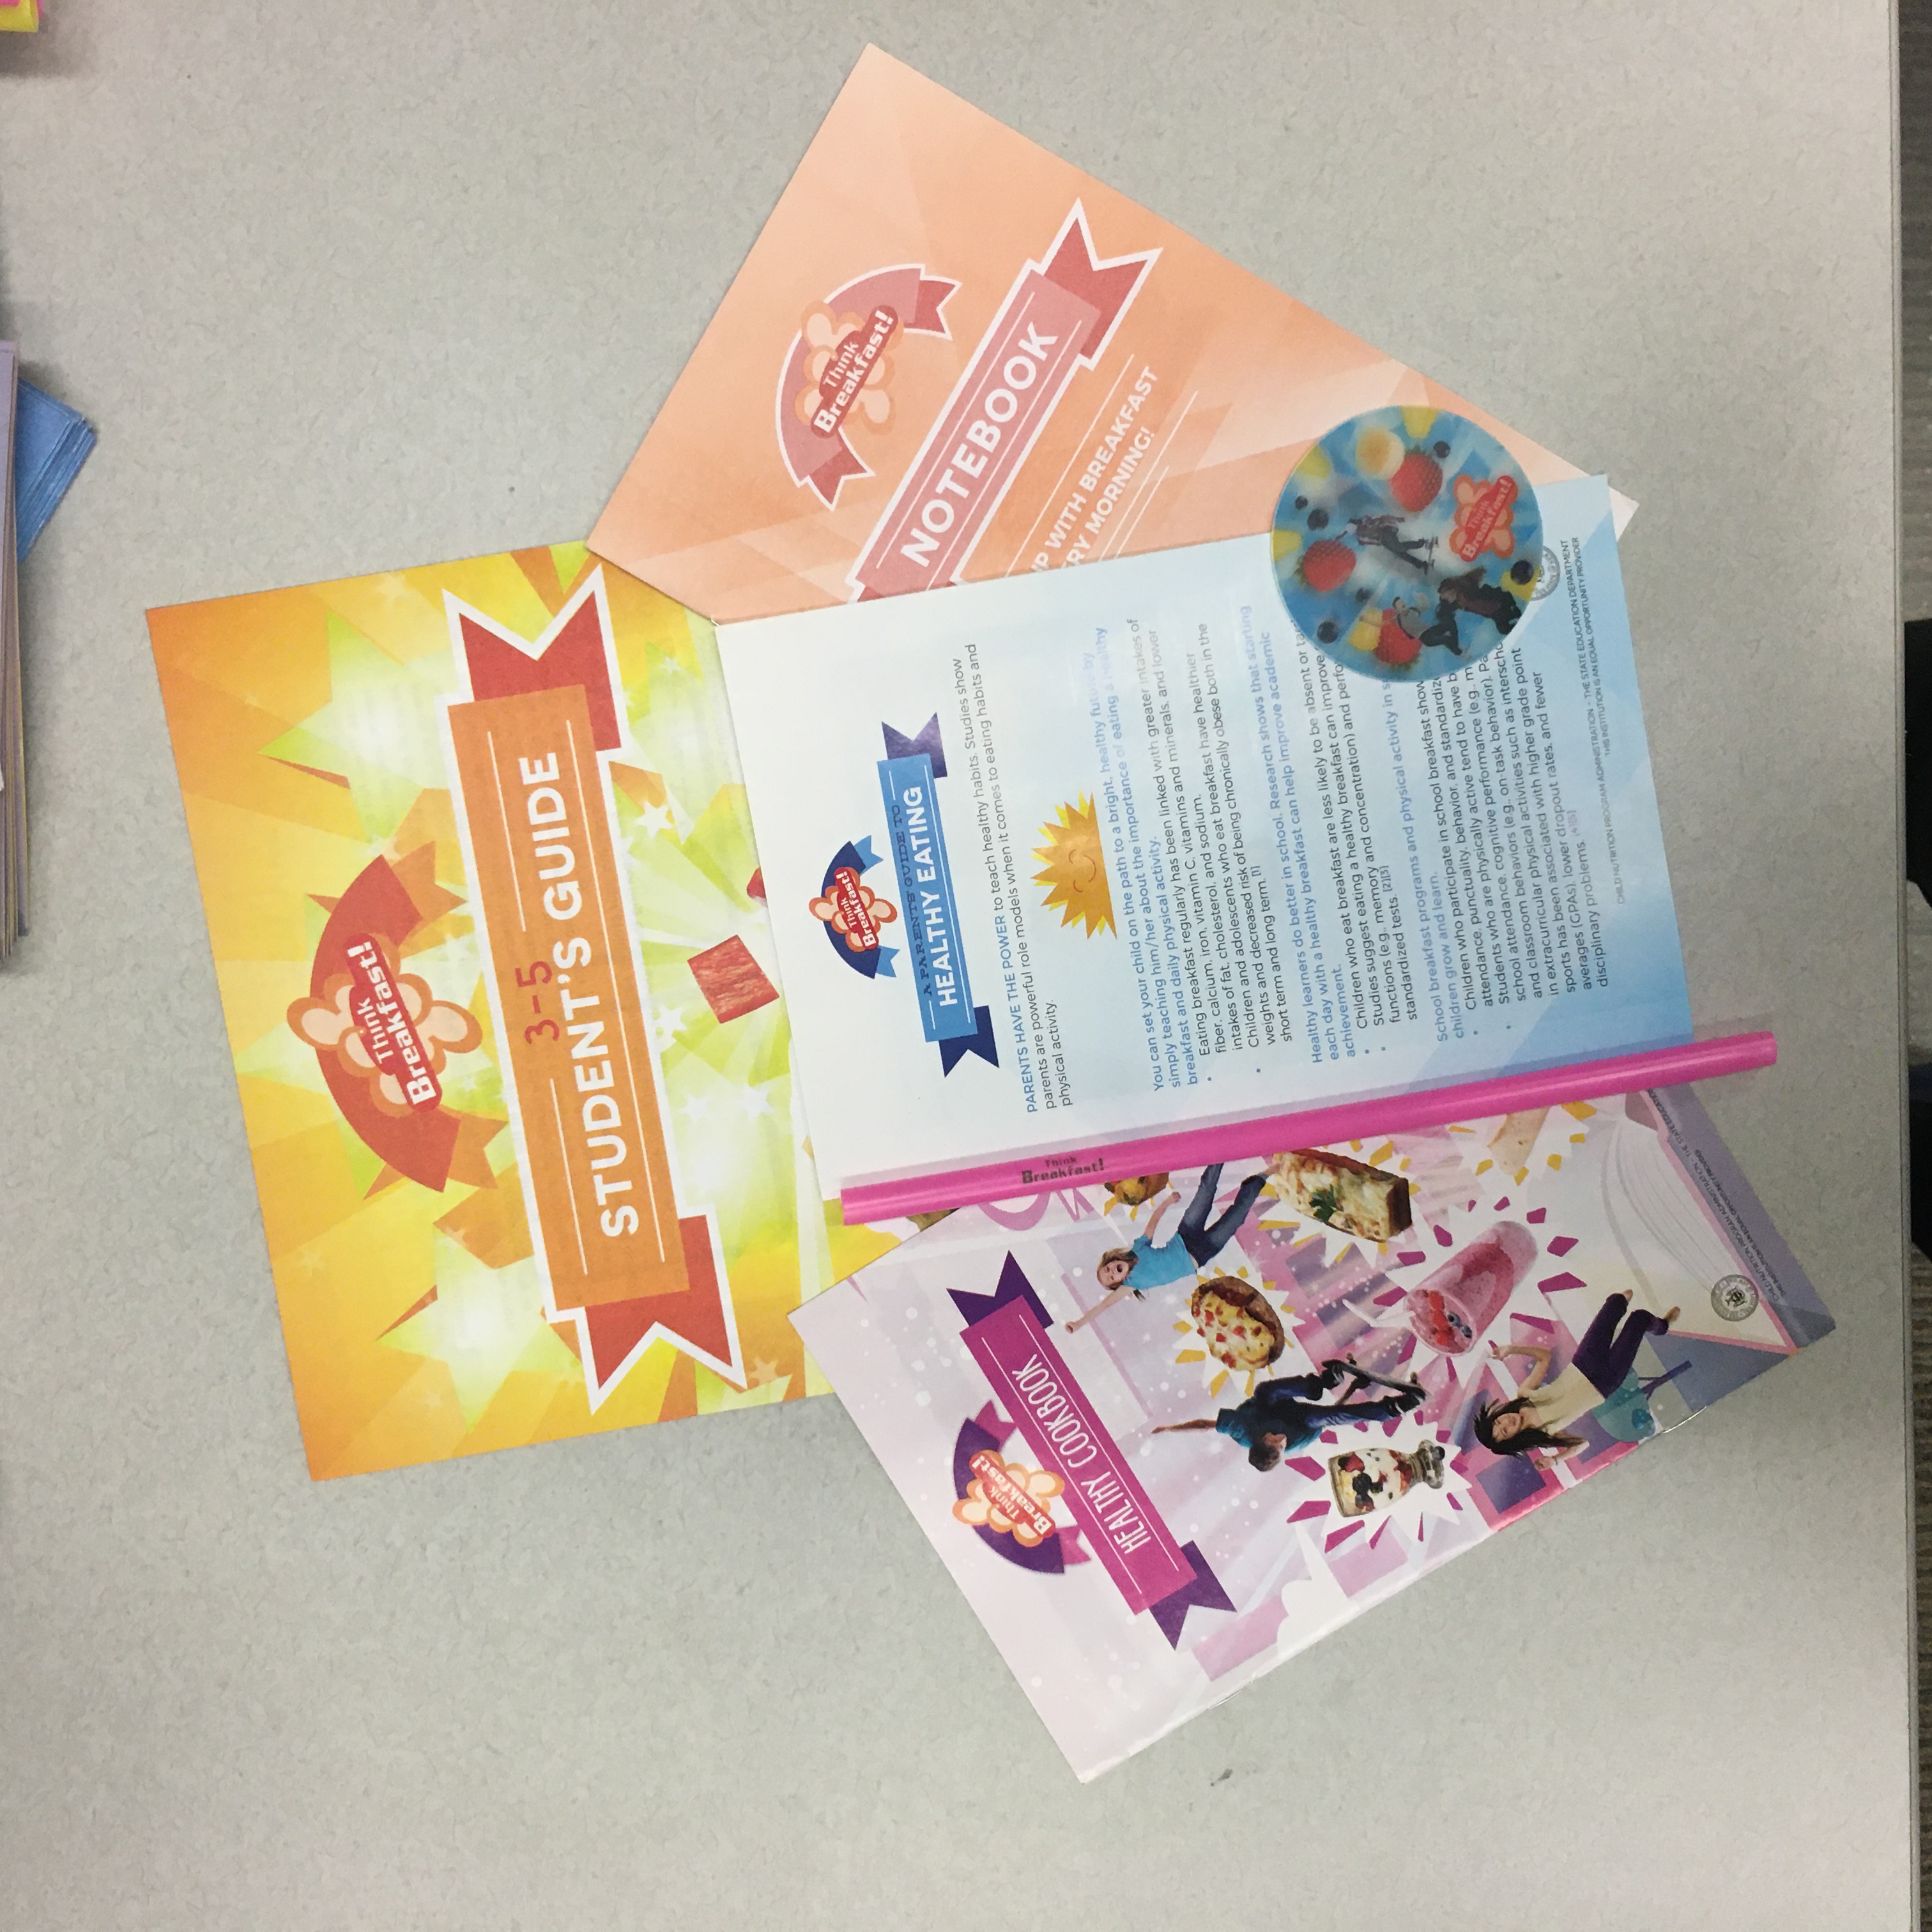 Think Breakfast Kits suitable for Grades 3-5. There is a 3-5 student's guide, a guide to healthy eating, a healthy cookbook, a notebook, a sticker and a straw.